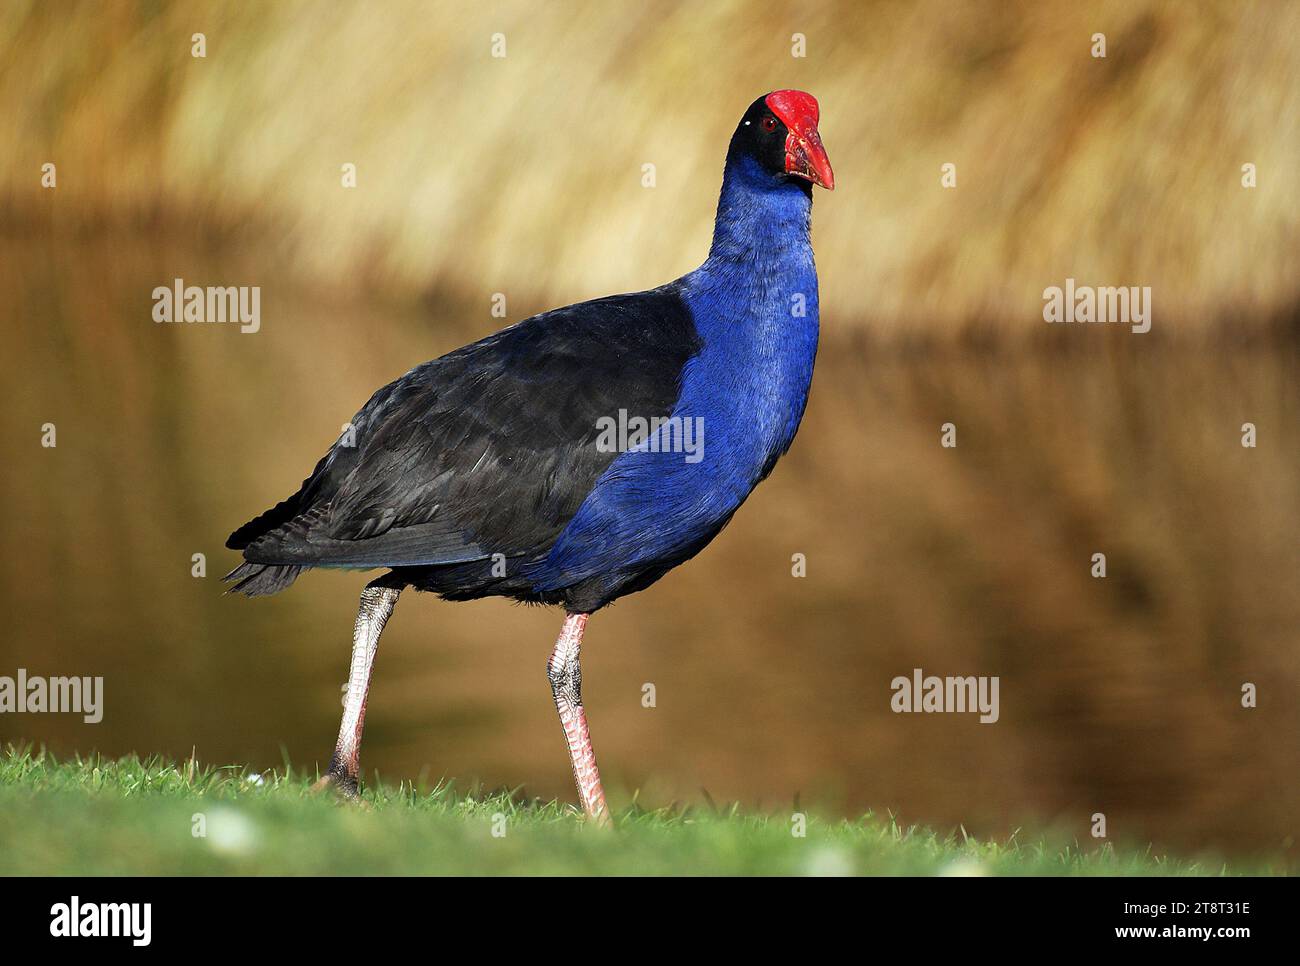 Australasian swamphen, The Australasian swamphen (Porphyrio melanotus) is a species of swamphen (Porphyrio) occurring in eastern Indonesia (the Moluccas, Aru and Kai Islands), Papua New Guinea, Australia and New Zealand. In New Zealand, it is known as the pukeko (from the Māori pūkeko). The species used to be considered a subspecies of the purple swamphen Stock Photo